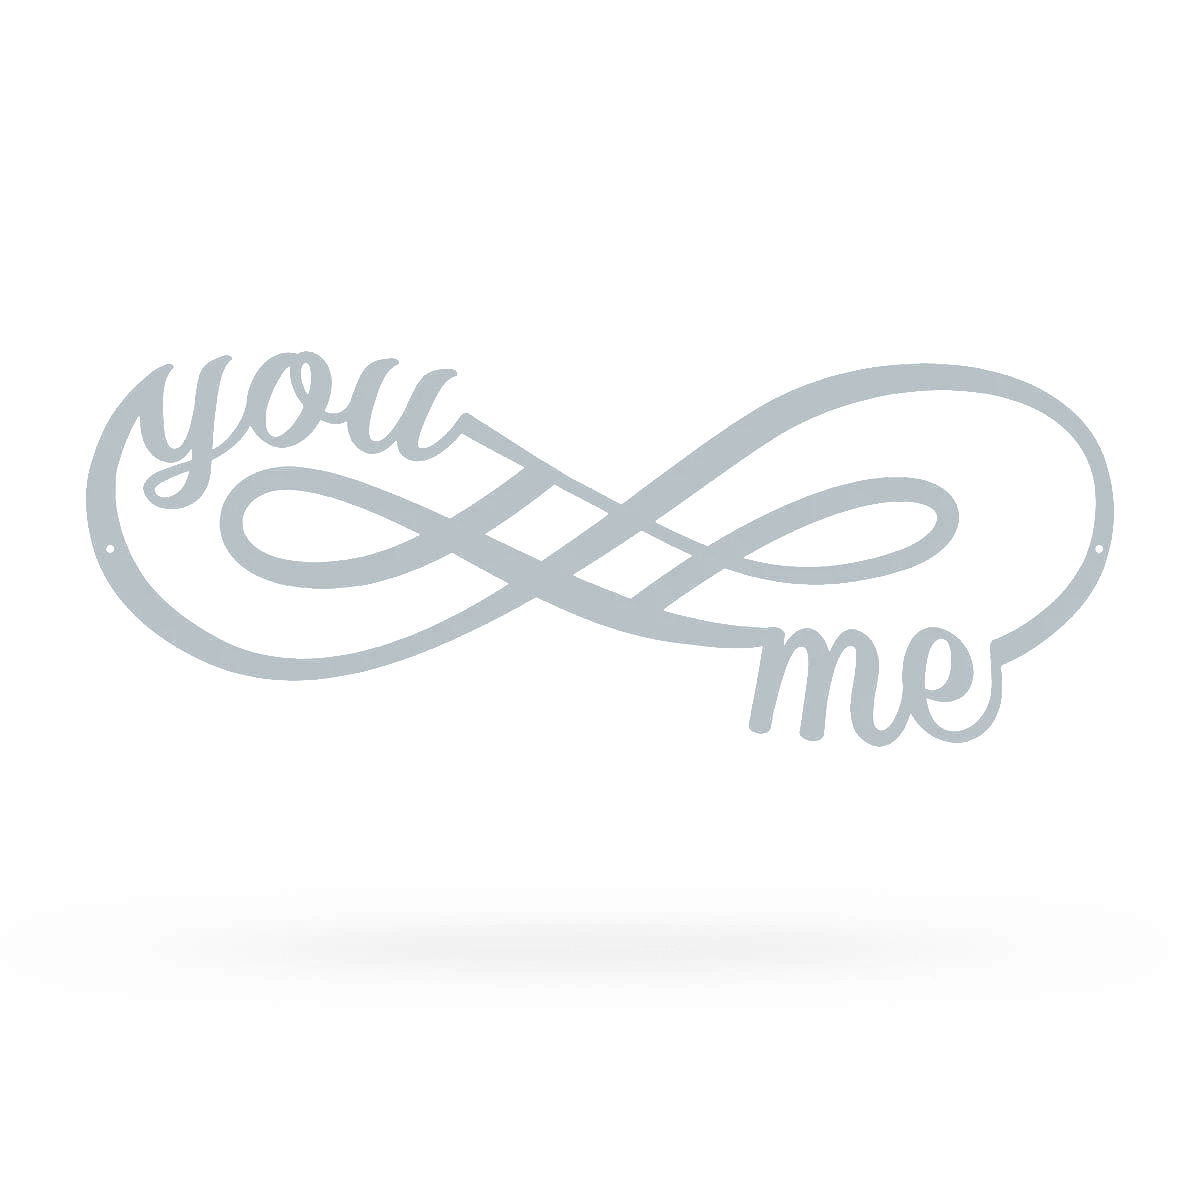 You + Me for Infinity Wall Décor Sign 7"x18" / Textured Silver - RealSteel Center